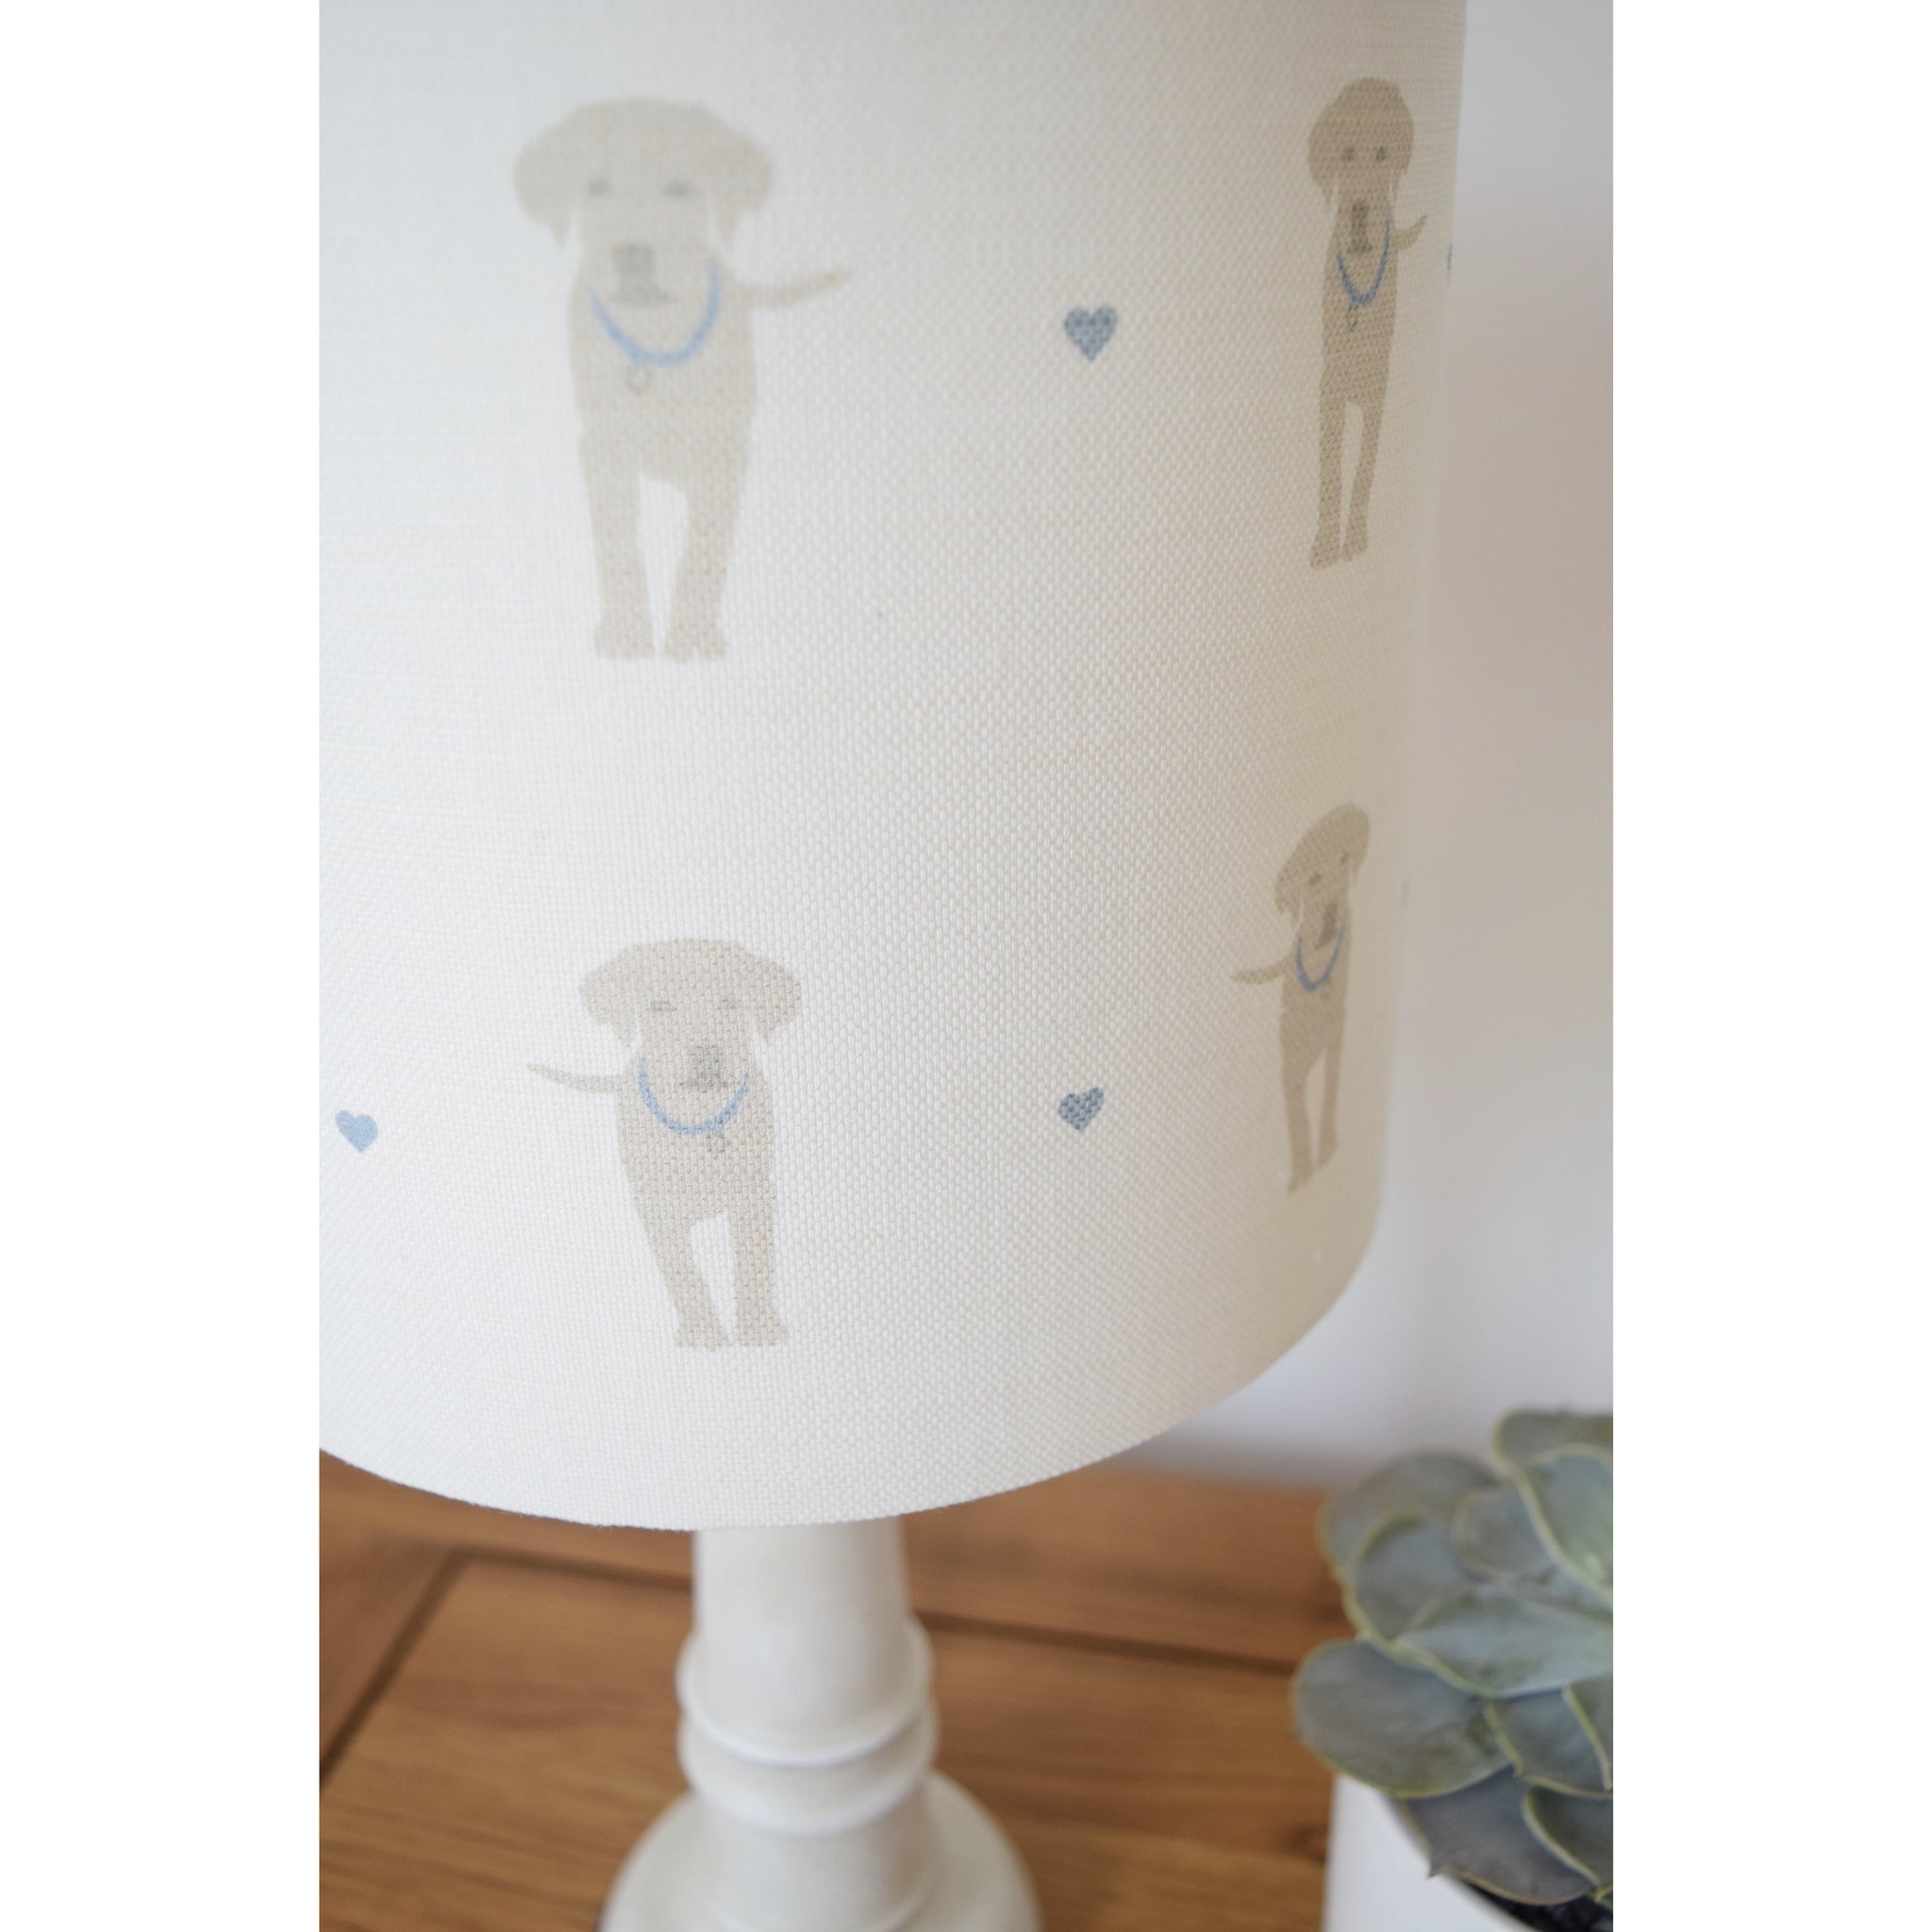 Olive & Daisy Puppy Love Linen Lampshade - Sand Colored Puppies on Cream with Blue Hearts